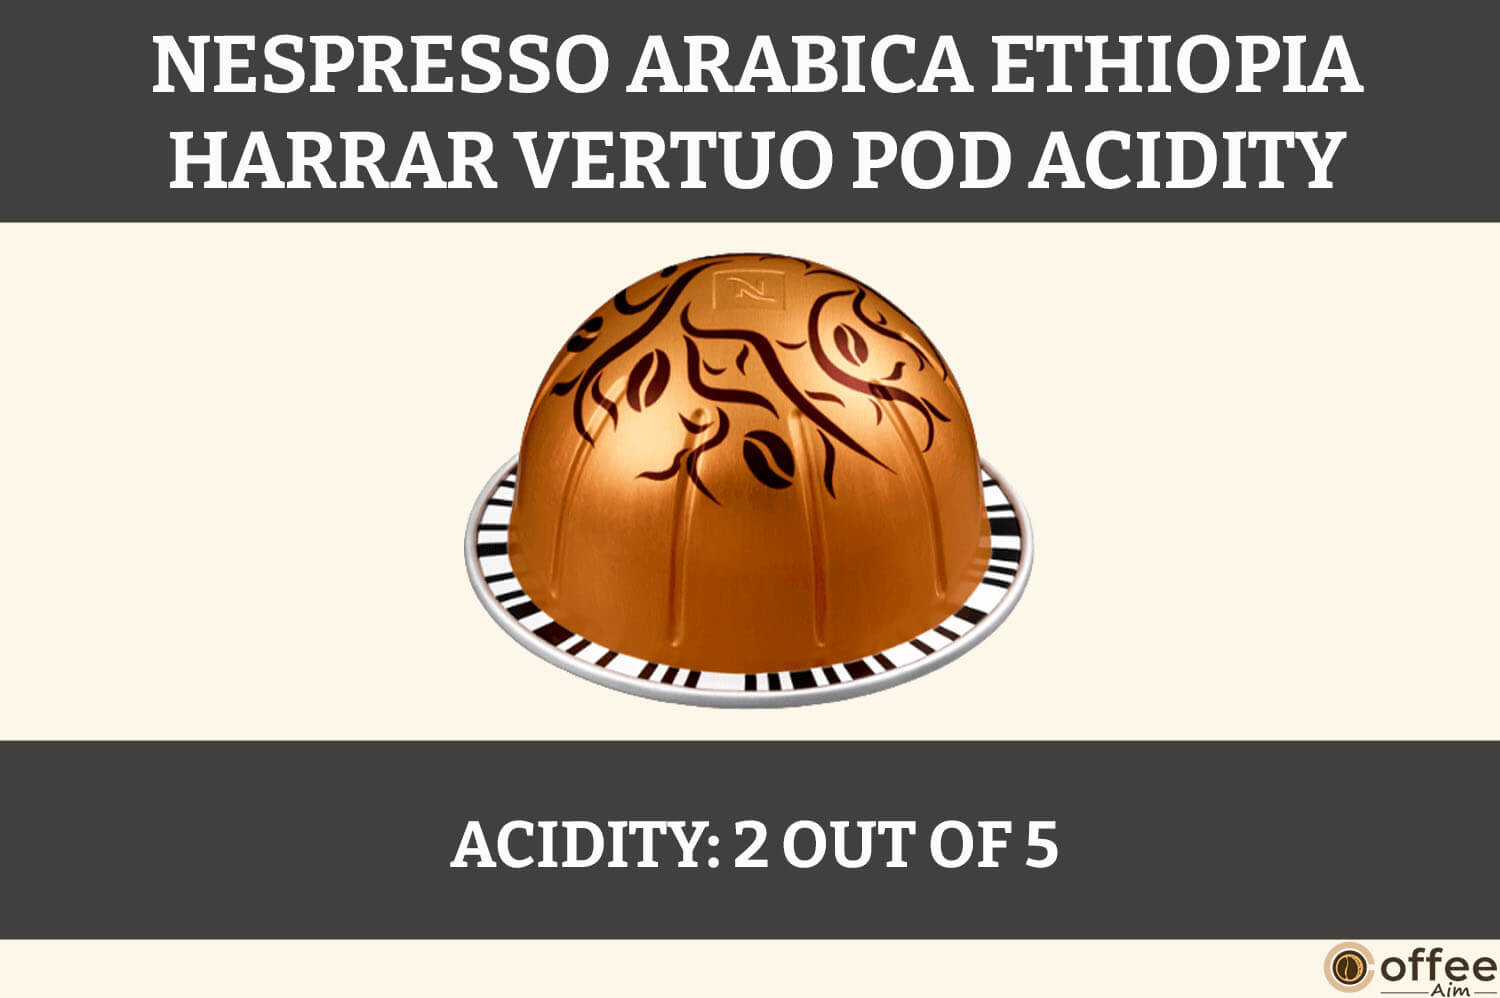 This image visually conveys the Acidity of the Nespresso Arabica Ethiopia Harrar Vertuo Pod, serving as a complement to the article titled 'Nespresso Arabica Ethiopia Harrar Vertuo Pod Review.